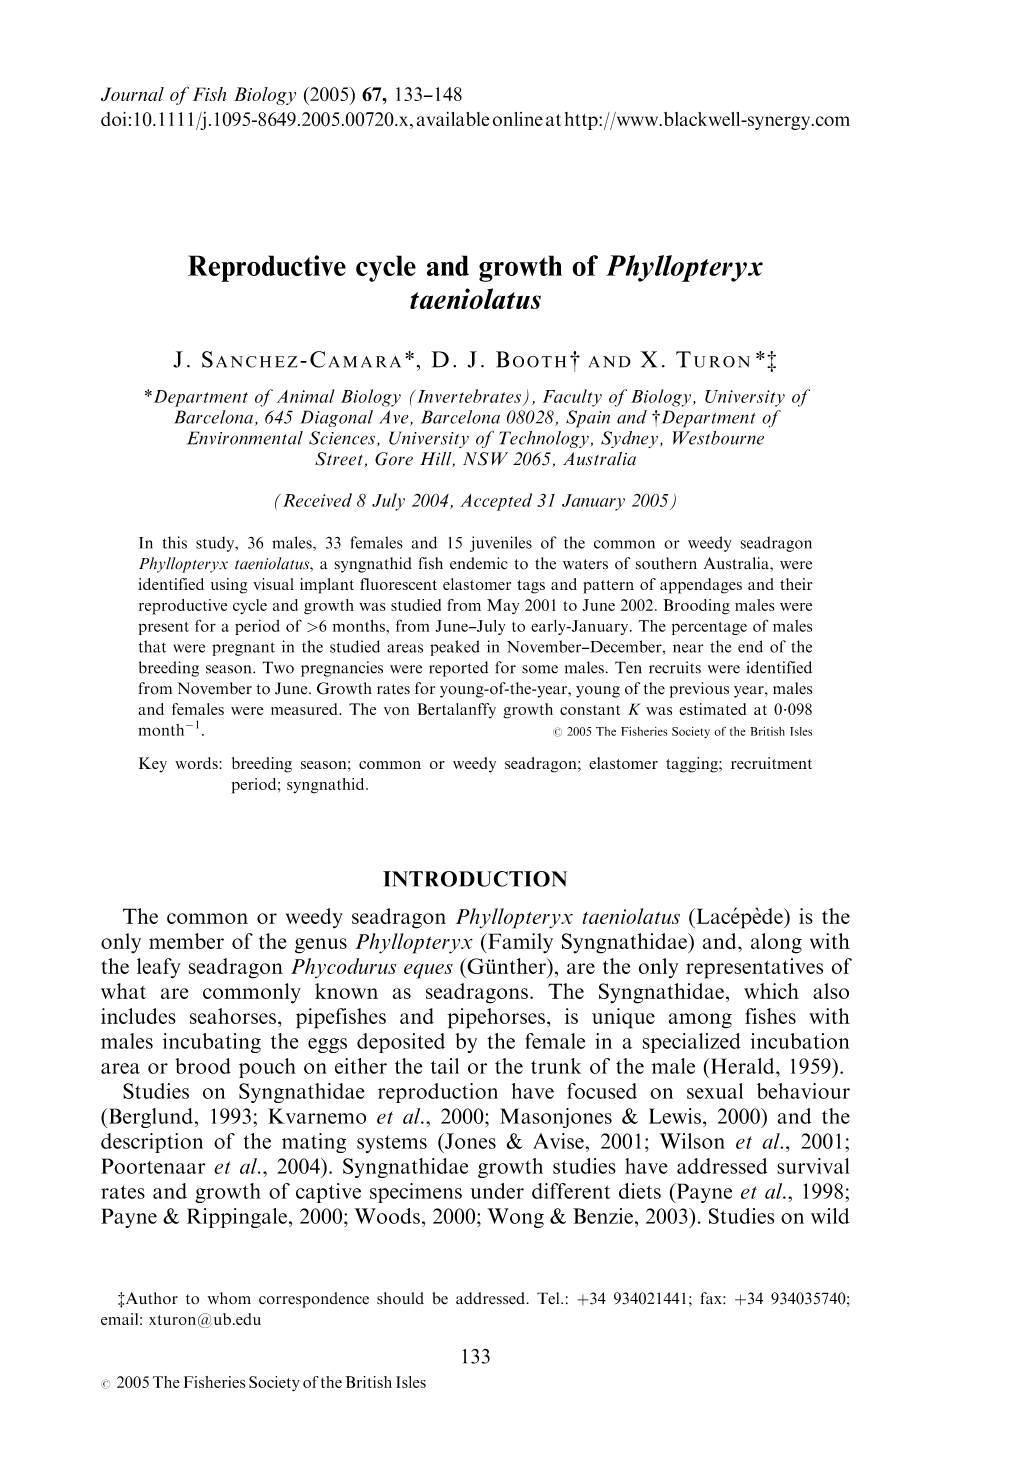 Reproductive Cycle and Growth of Phyllopteryx Taeniolatus